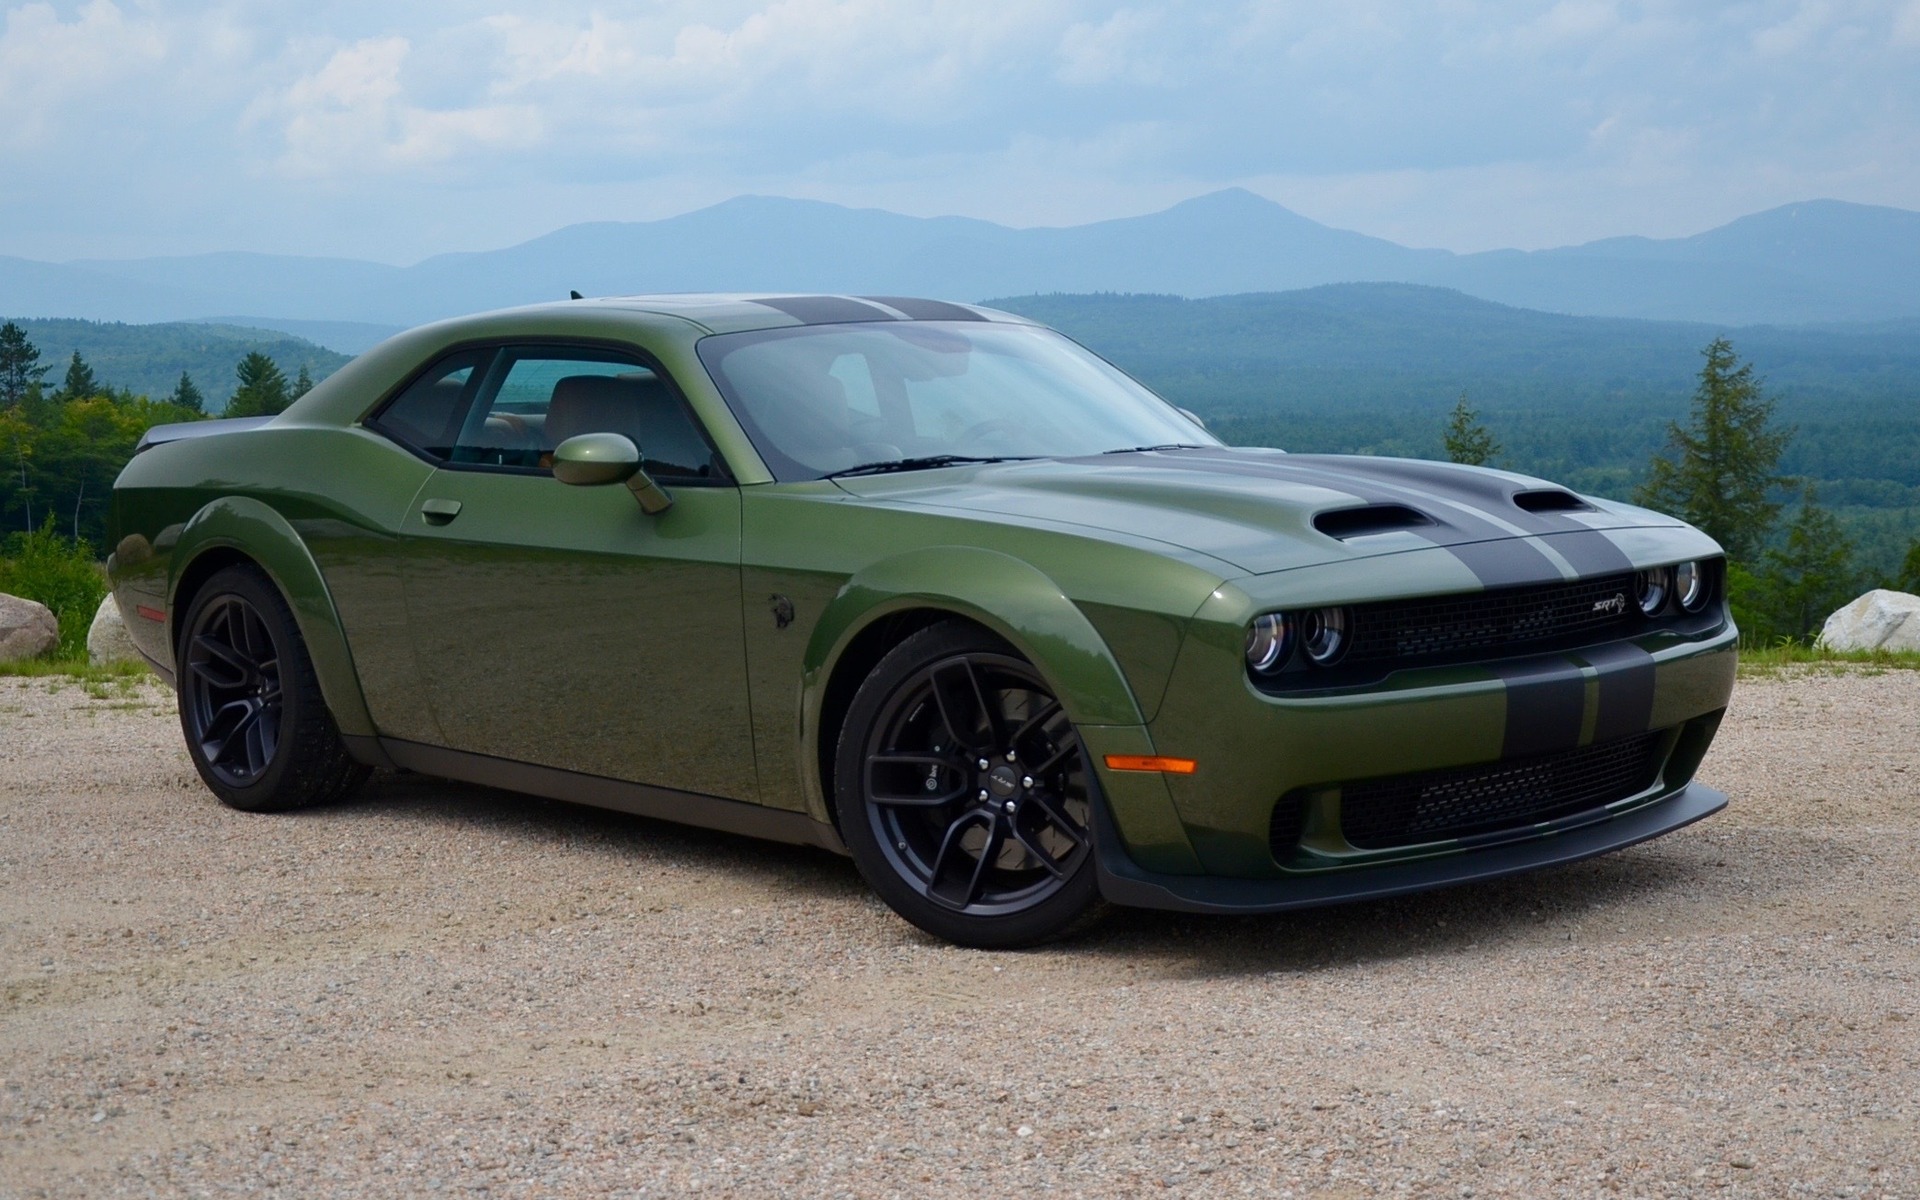 2019 Dodge Challenger Sxt Specifications The Car Guide